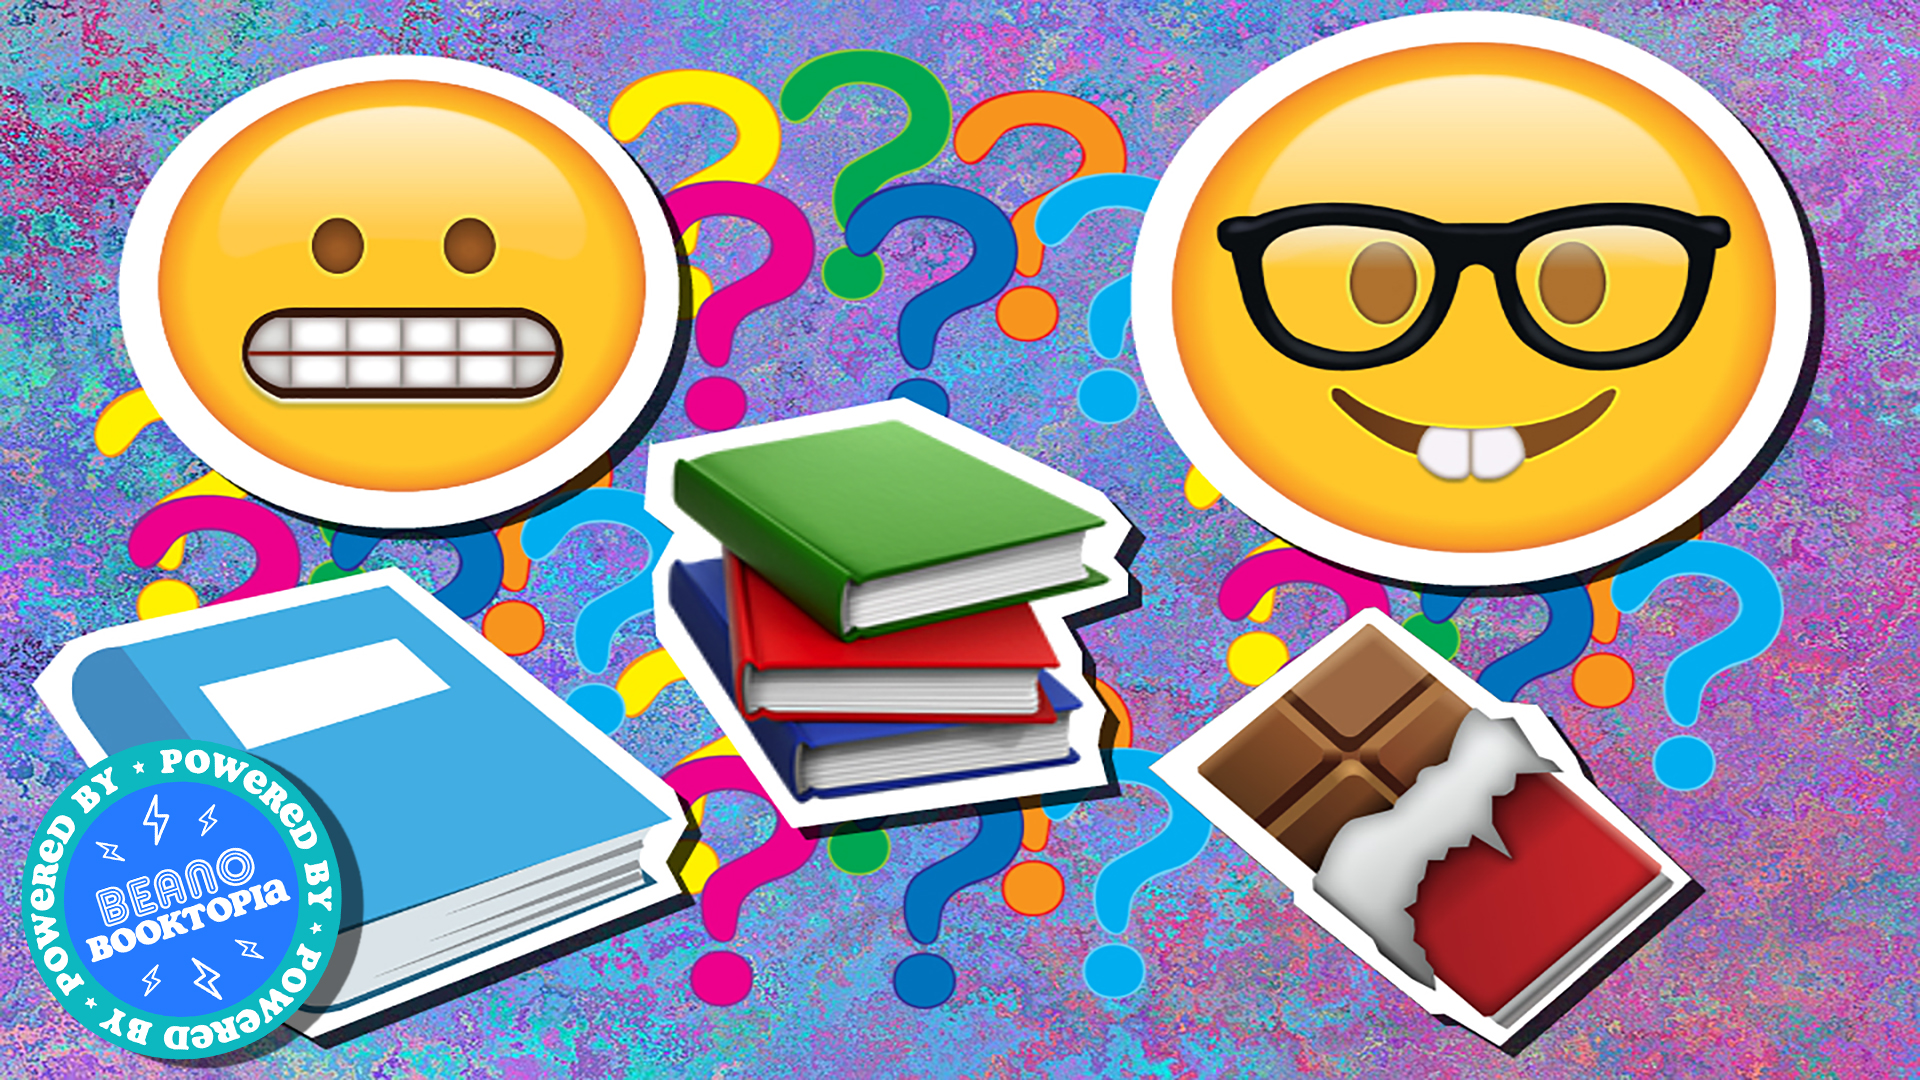 Guess the Books from our Cryptic Emoji Quiz